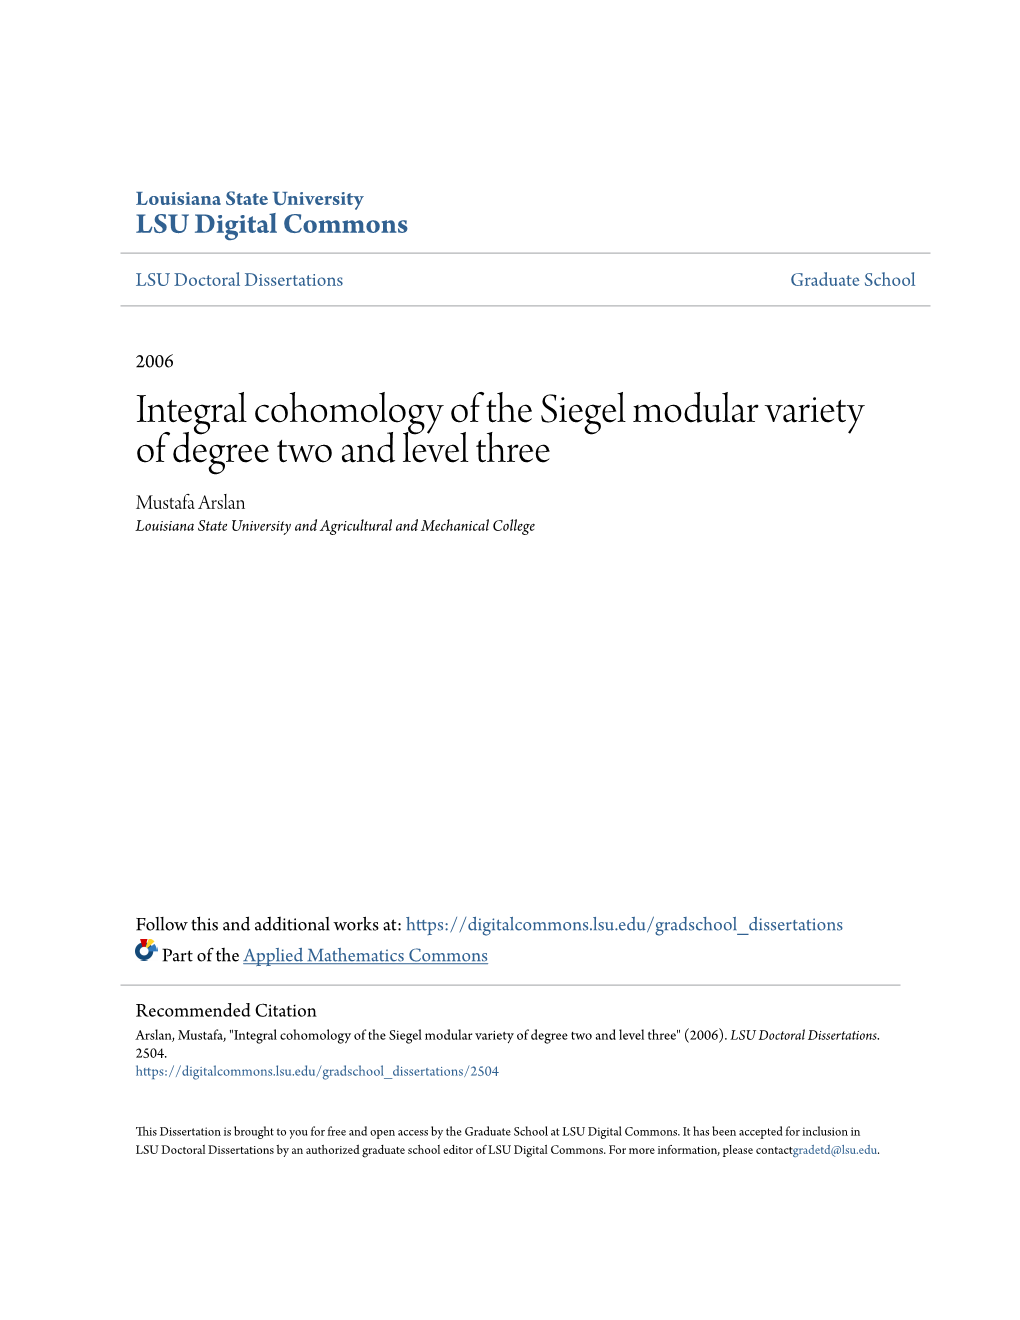 Integral Cohomology of the Siegel Modular Variety of Degree Two and Level Three Mustafa Arslan Louisiana State University and Agricultural and Mechanical College